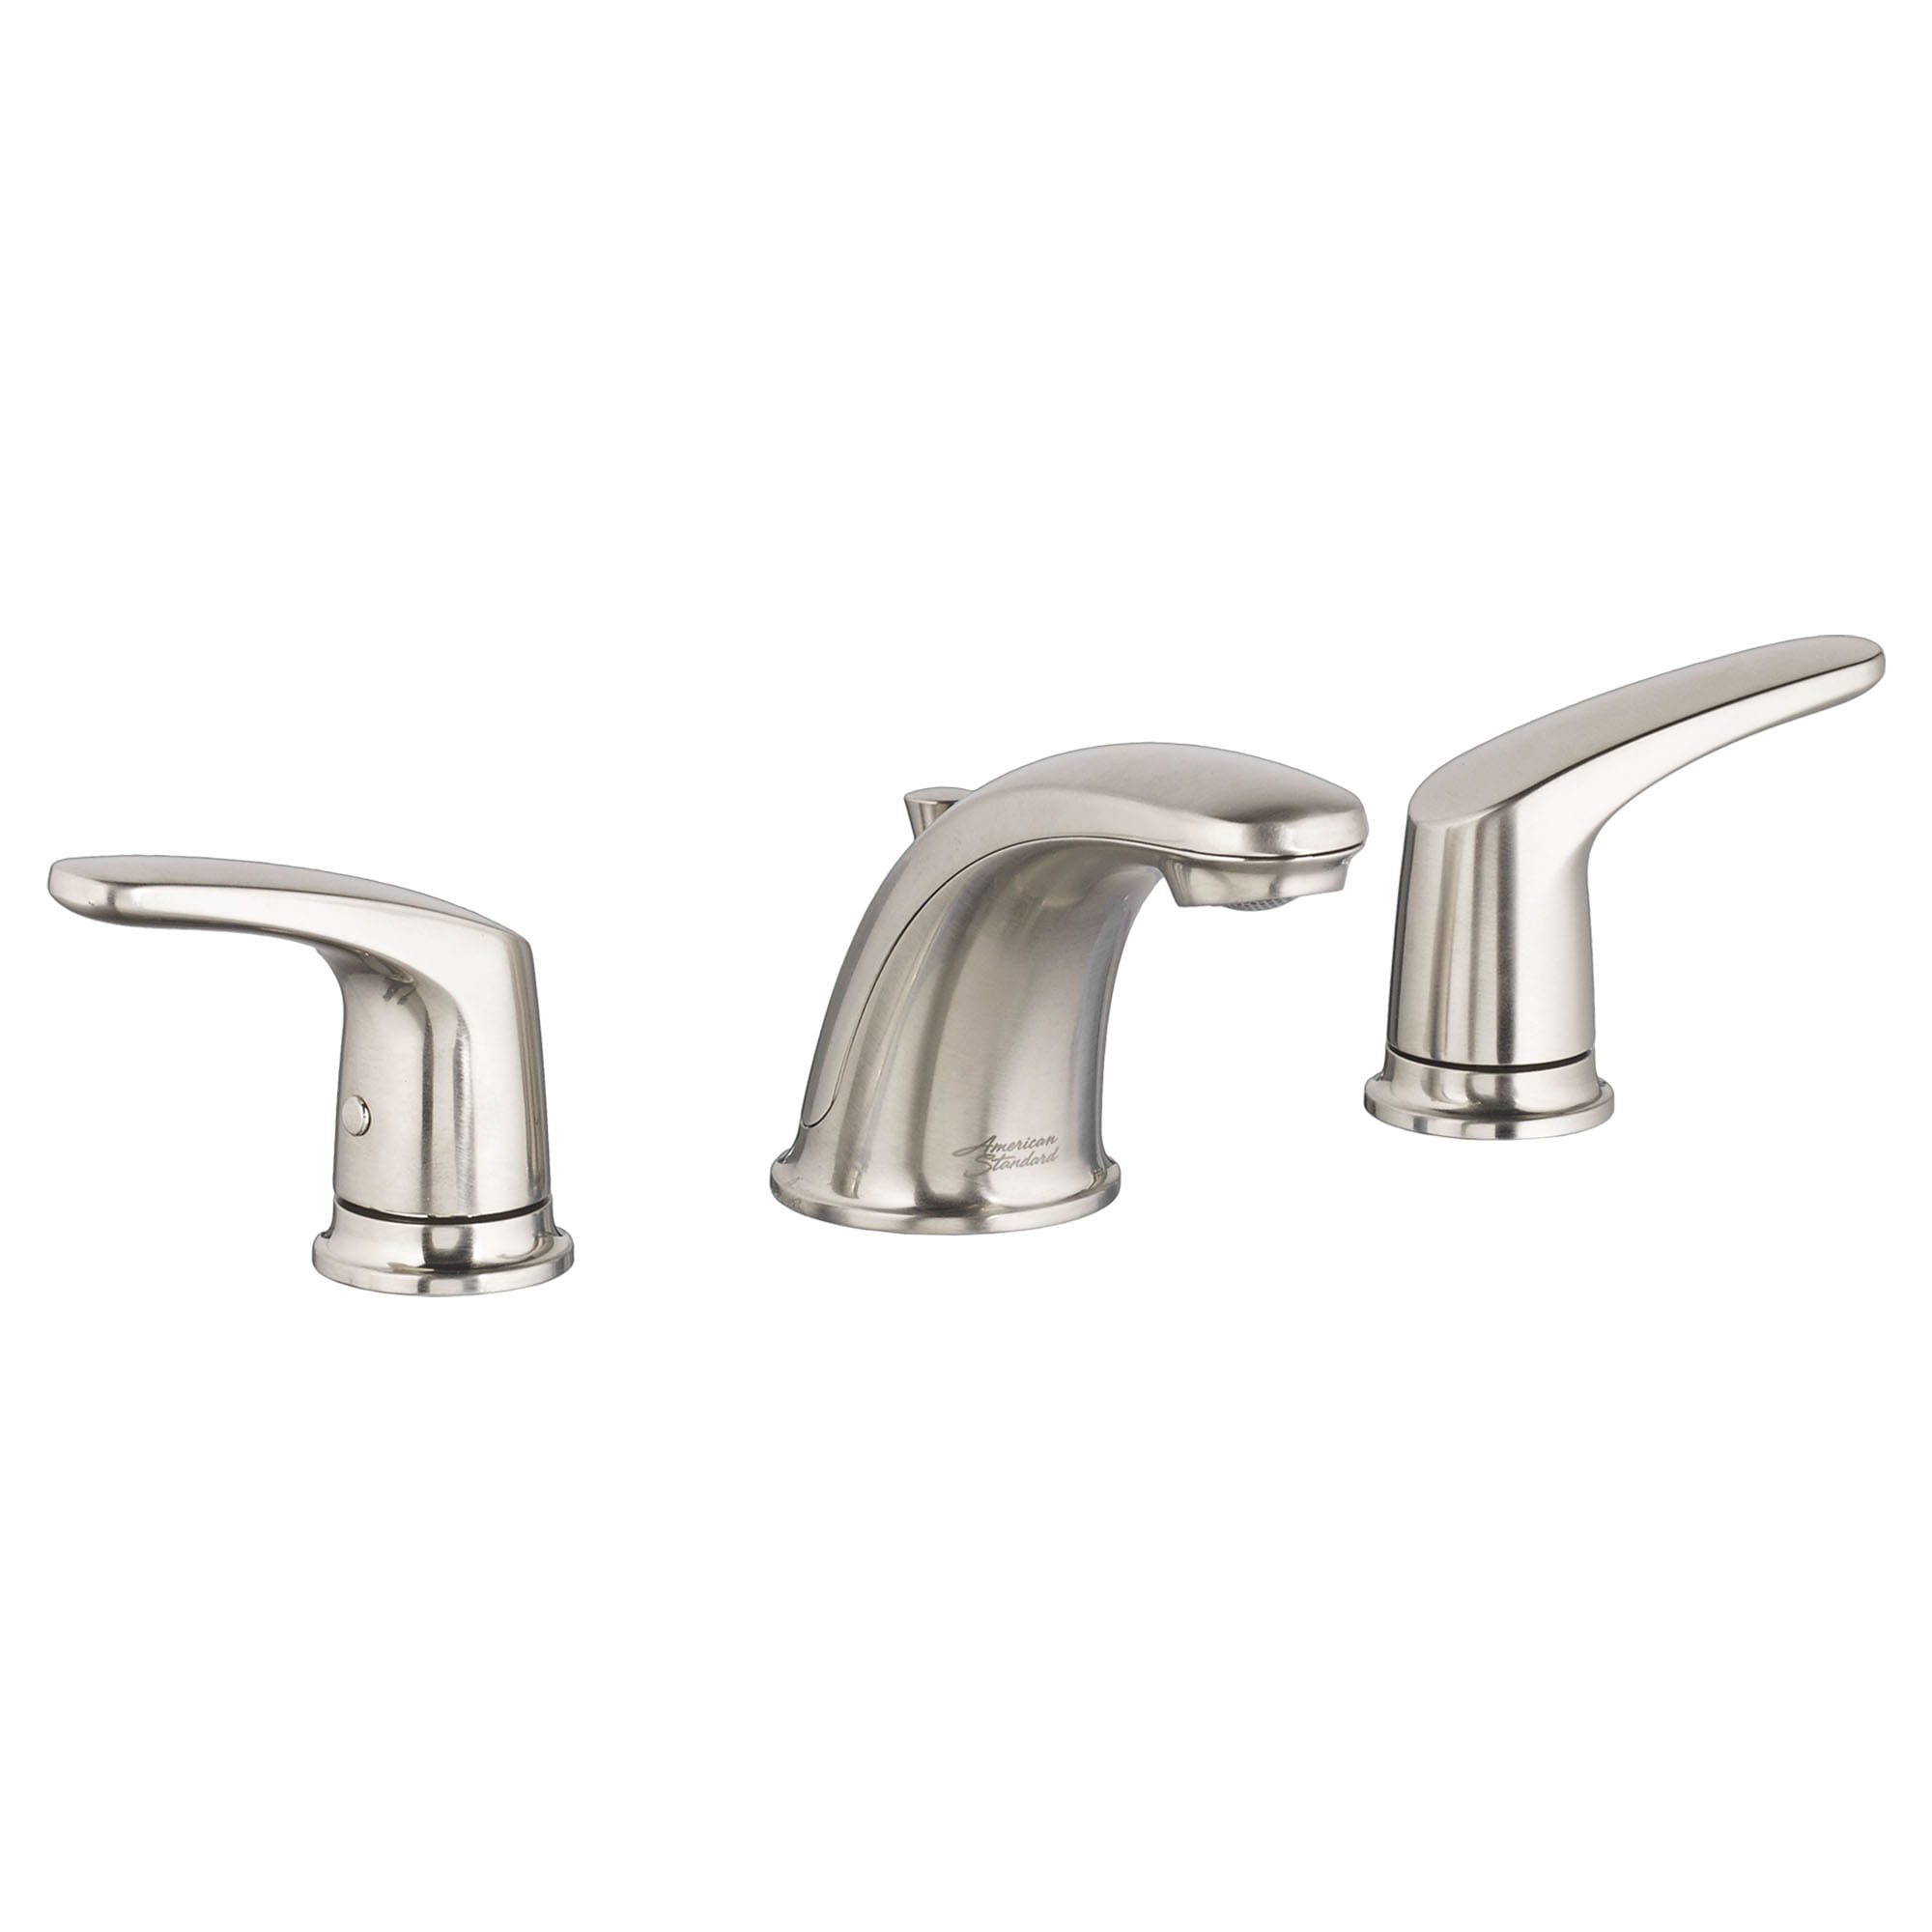 Colony PRO 8 Inch Widespread 2 Handle Bathroom Faucet 12 gpm 45 L min With Lever Handles   BRUSHED NICKEL